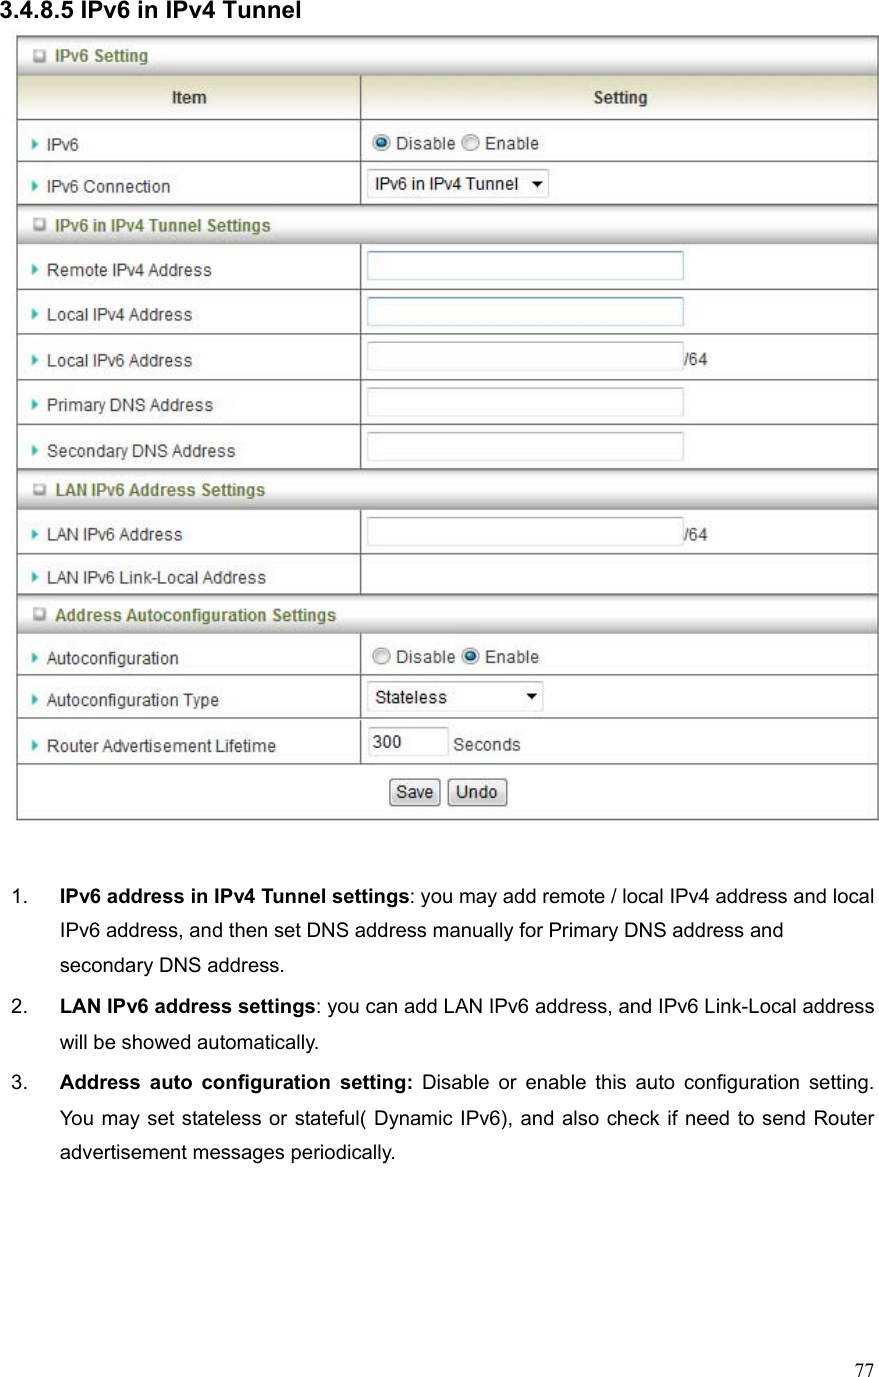  773.4.8.5 IPv6 in IPv4 Tunnel   1.  IPv6 address in IPv4 Tunnel settings: you may add remote / local IPv4 address and local IPv6 address, and then set DNS address manually for Primary DNS address and secondary DNS address. 2.  LAN IPv6 address settings: you can add LAN IPv6 address, and IPv6 Link-Local address will be showed automatically. 3.  Address auto configuration setting: Disable or enable this auto configuration setting. You may set stateless or stateful( Dynamic IPv6), and also check if need to send Router advertisement messages periodically.    